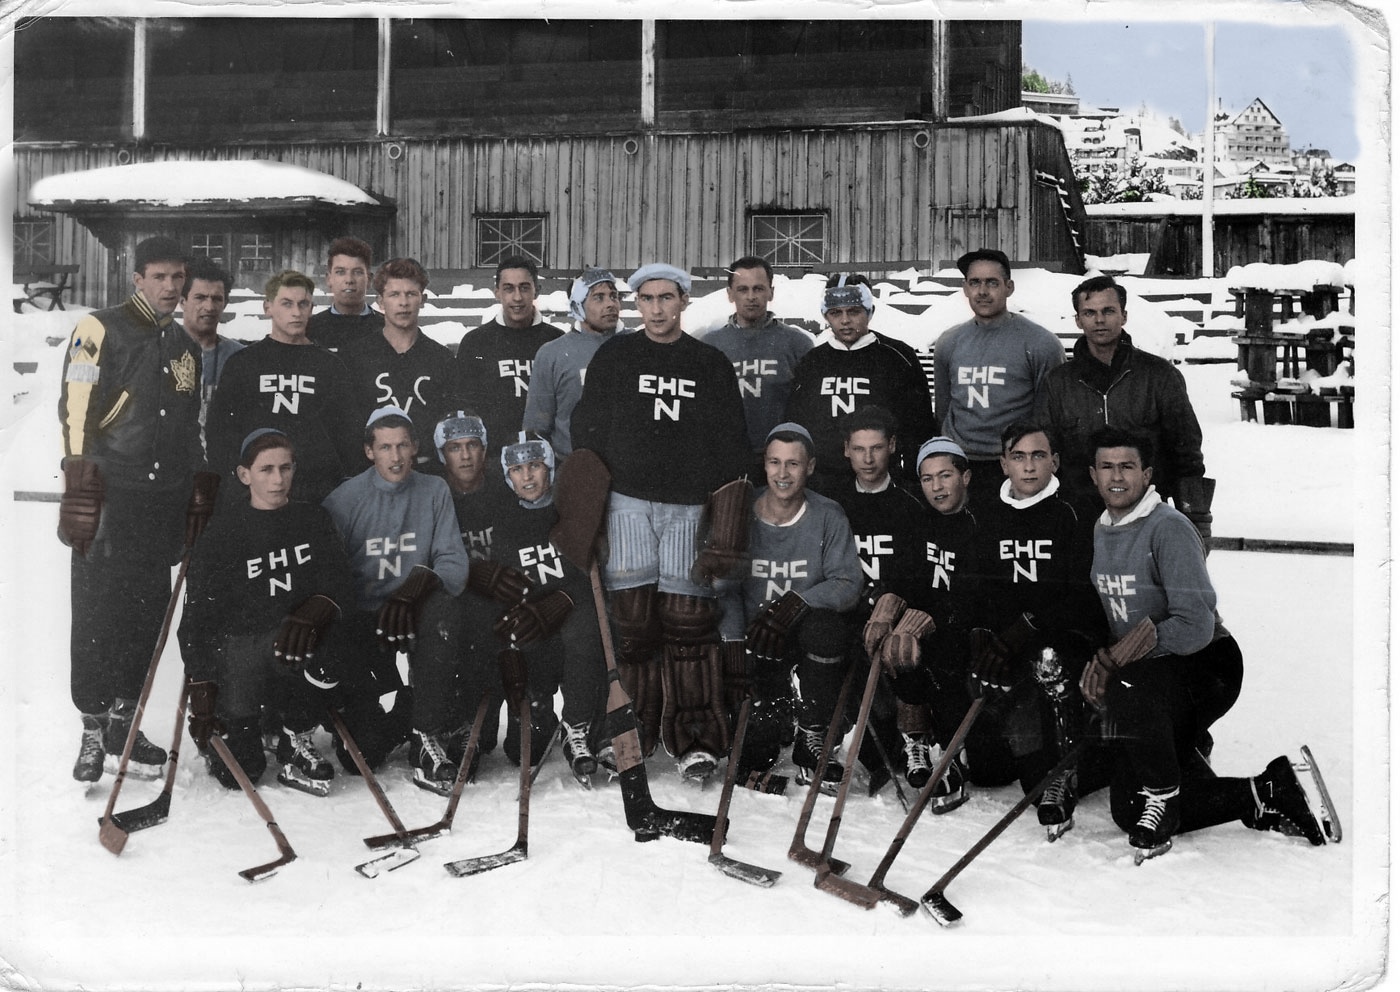 My Dad (top row, third from left) and his team EHC Niederrohrdorf in Davos/Switzerland, 1952. The goaltender is my uncle Walter. Colorized photo. View full size.